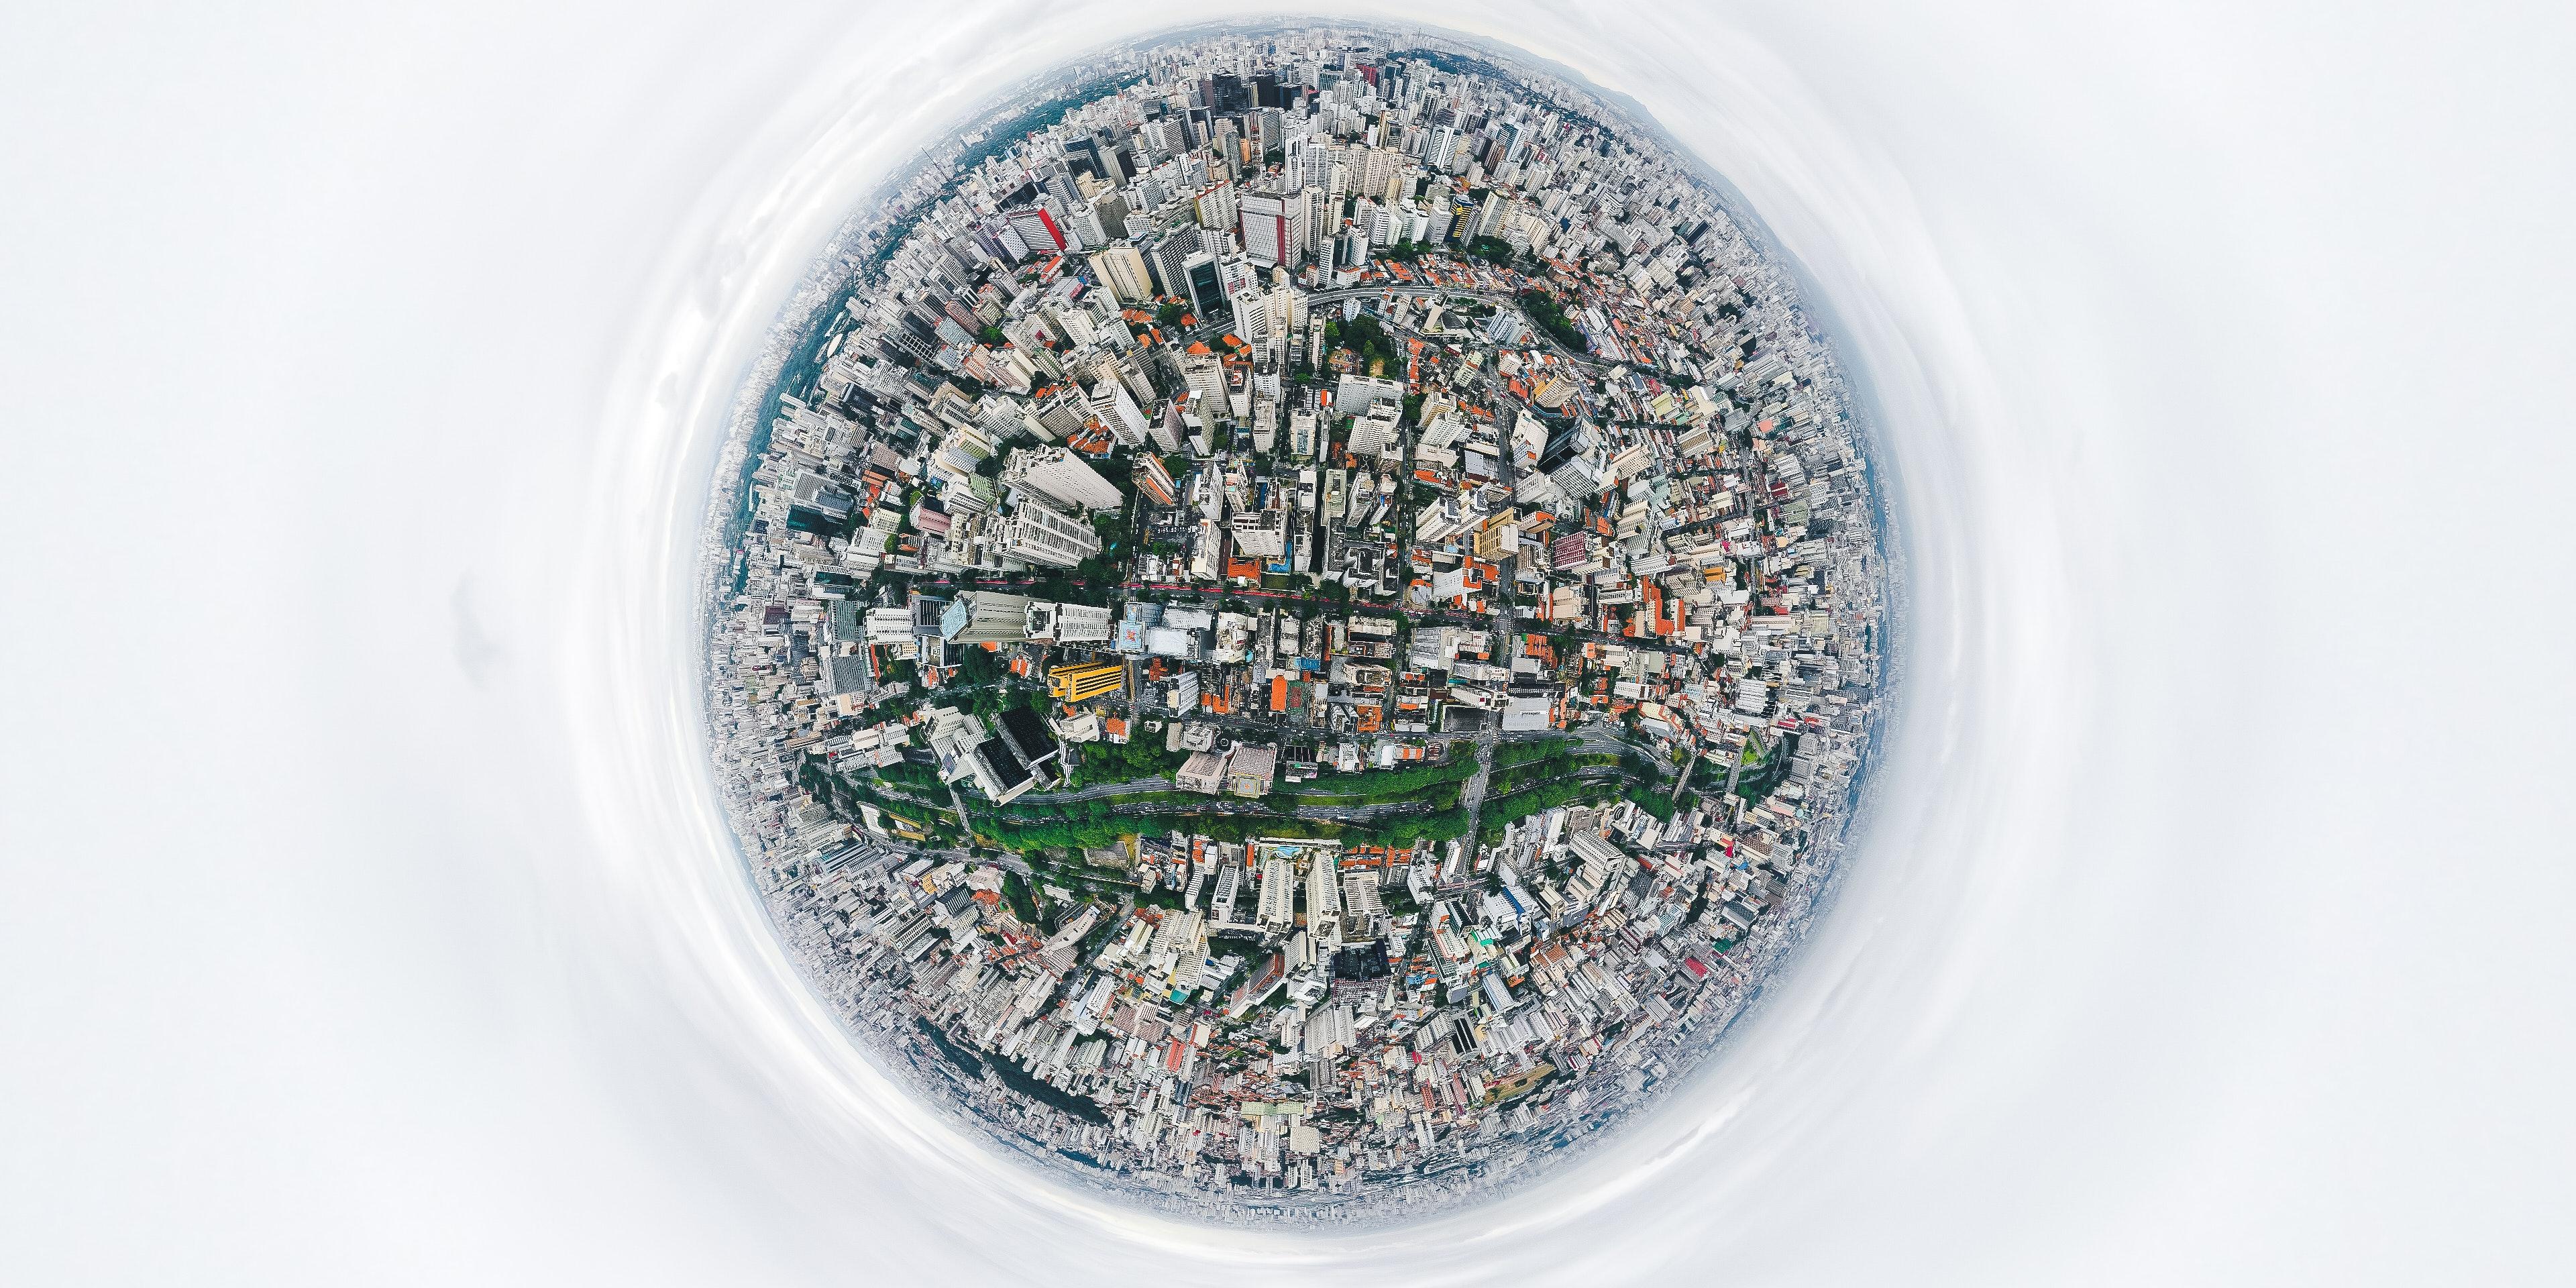 A city photographed from above from a rectilinear lens, making it look like a globe.